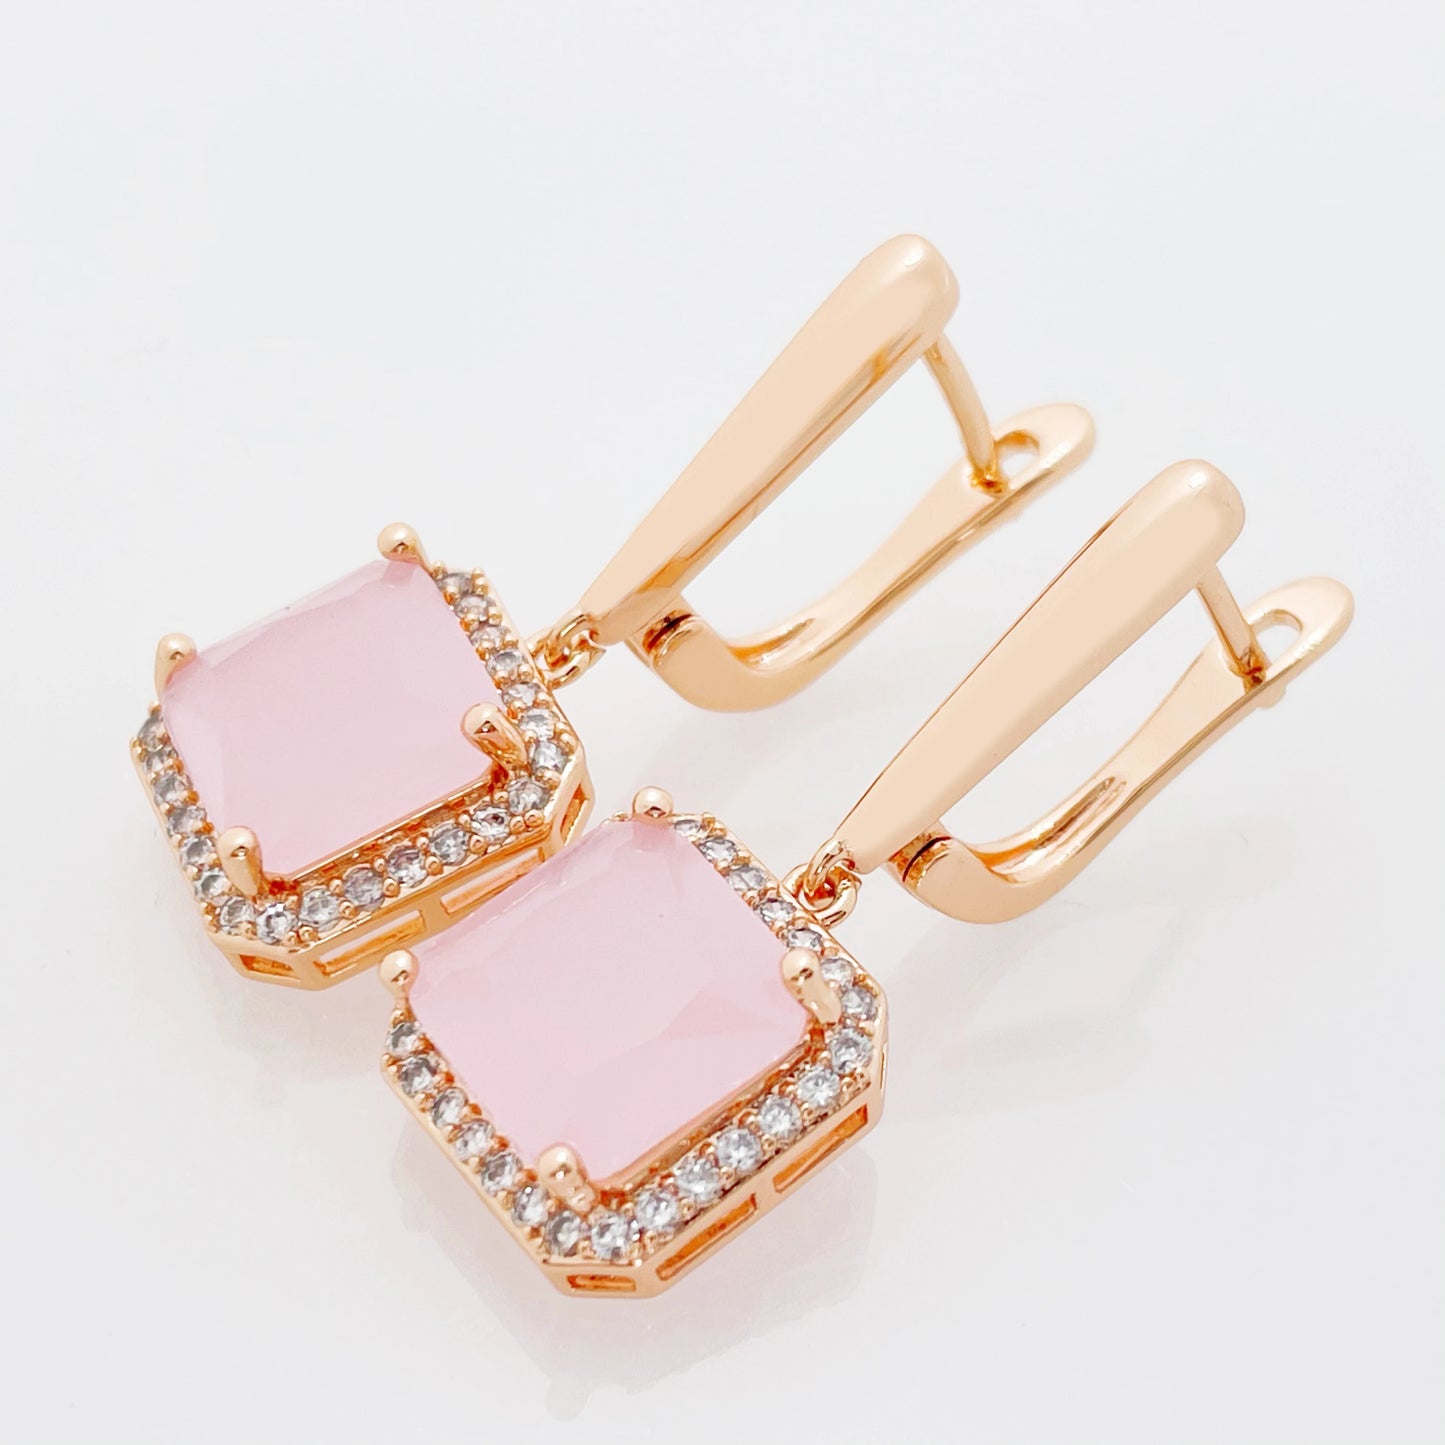 Aomigc Exclusive Square Long Women Fashion 585 Rose Gold Fine Jewelry Cyan/Pink Ice Natural Zircon Gorgeous Dangle Earrings